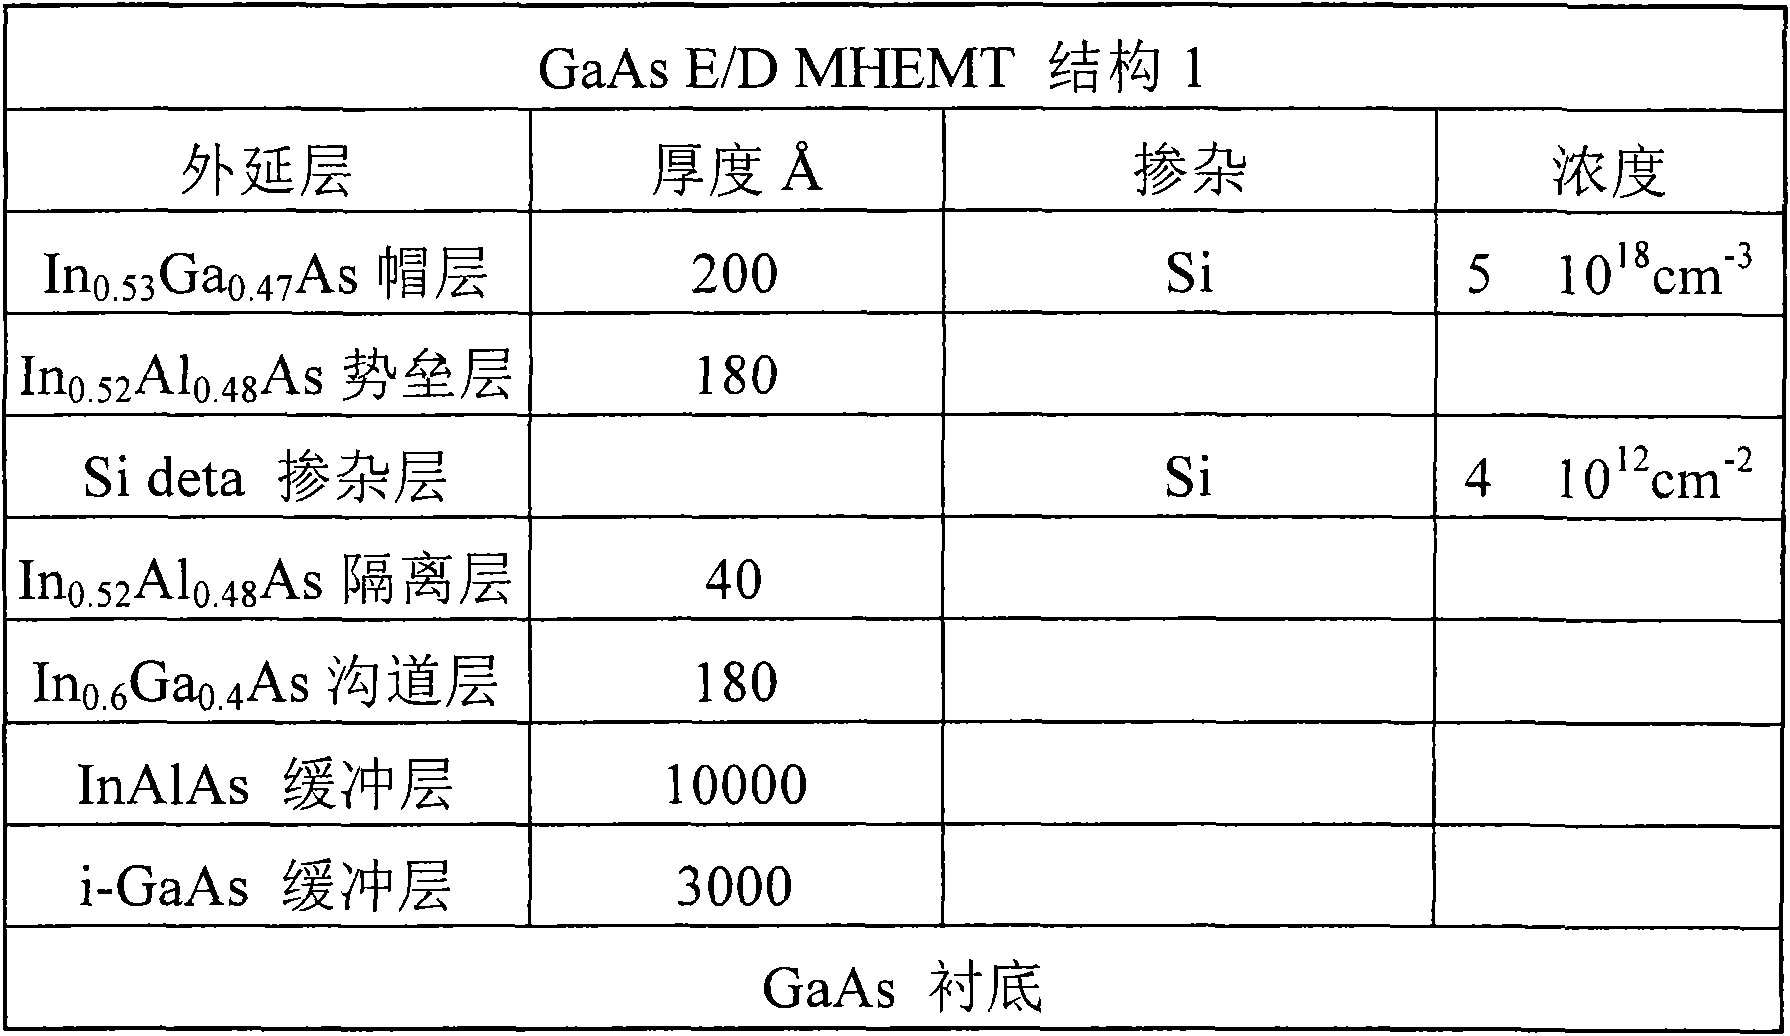 Method for manufacturing GaAs-based MHEMT device with grid length of 200nm